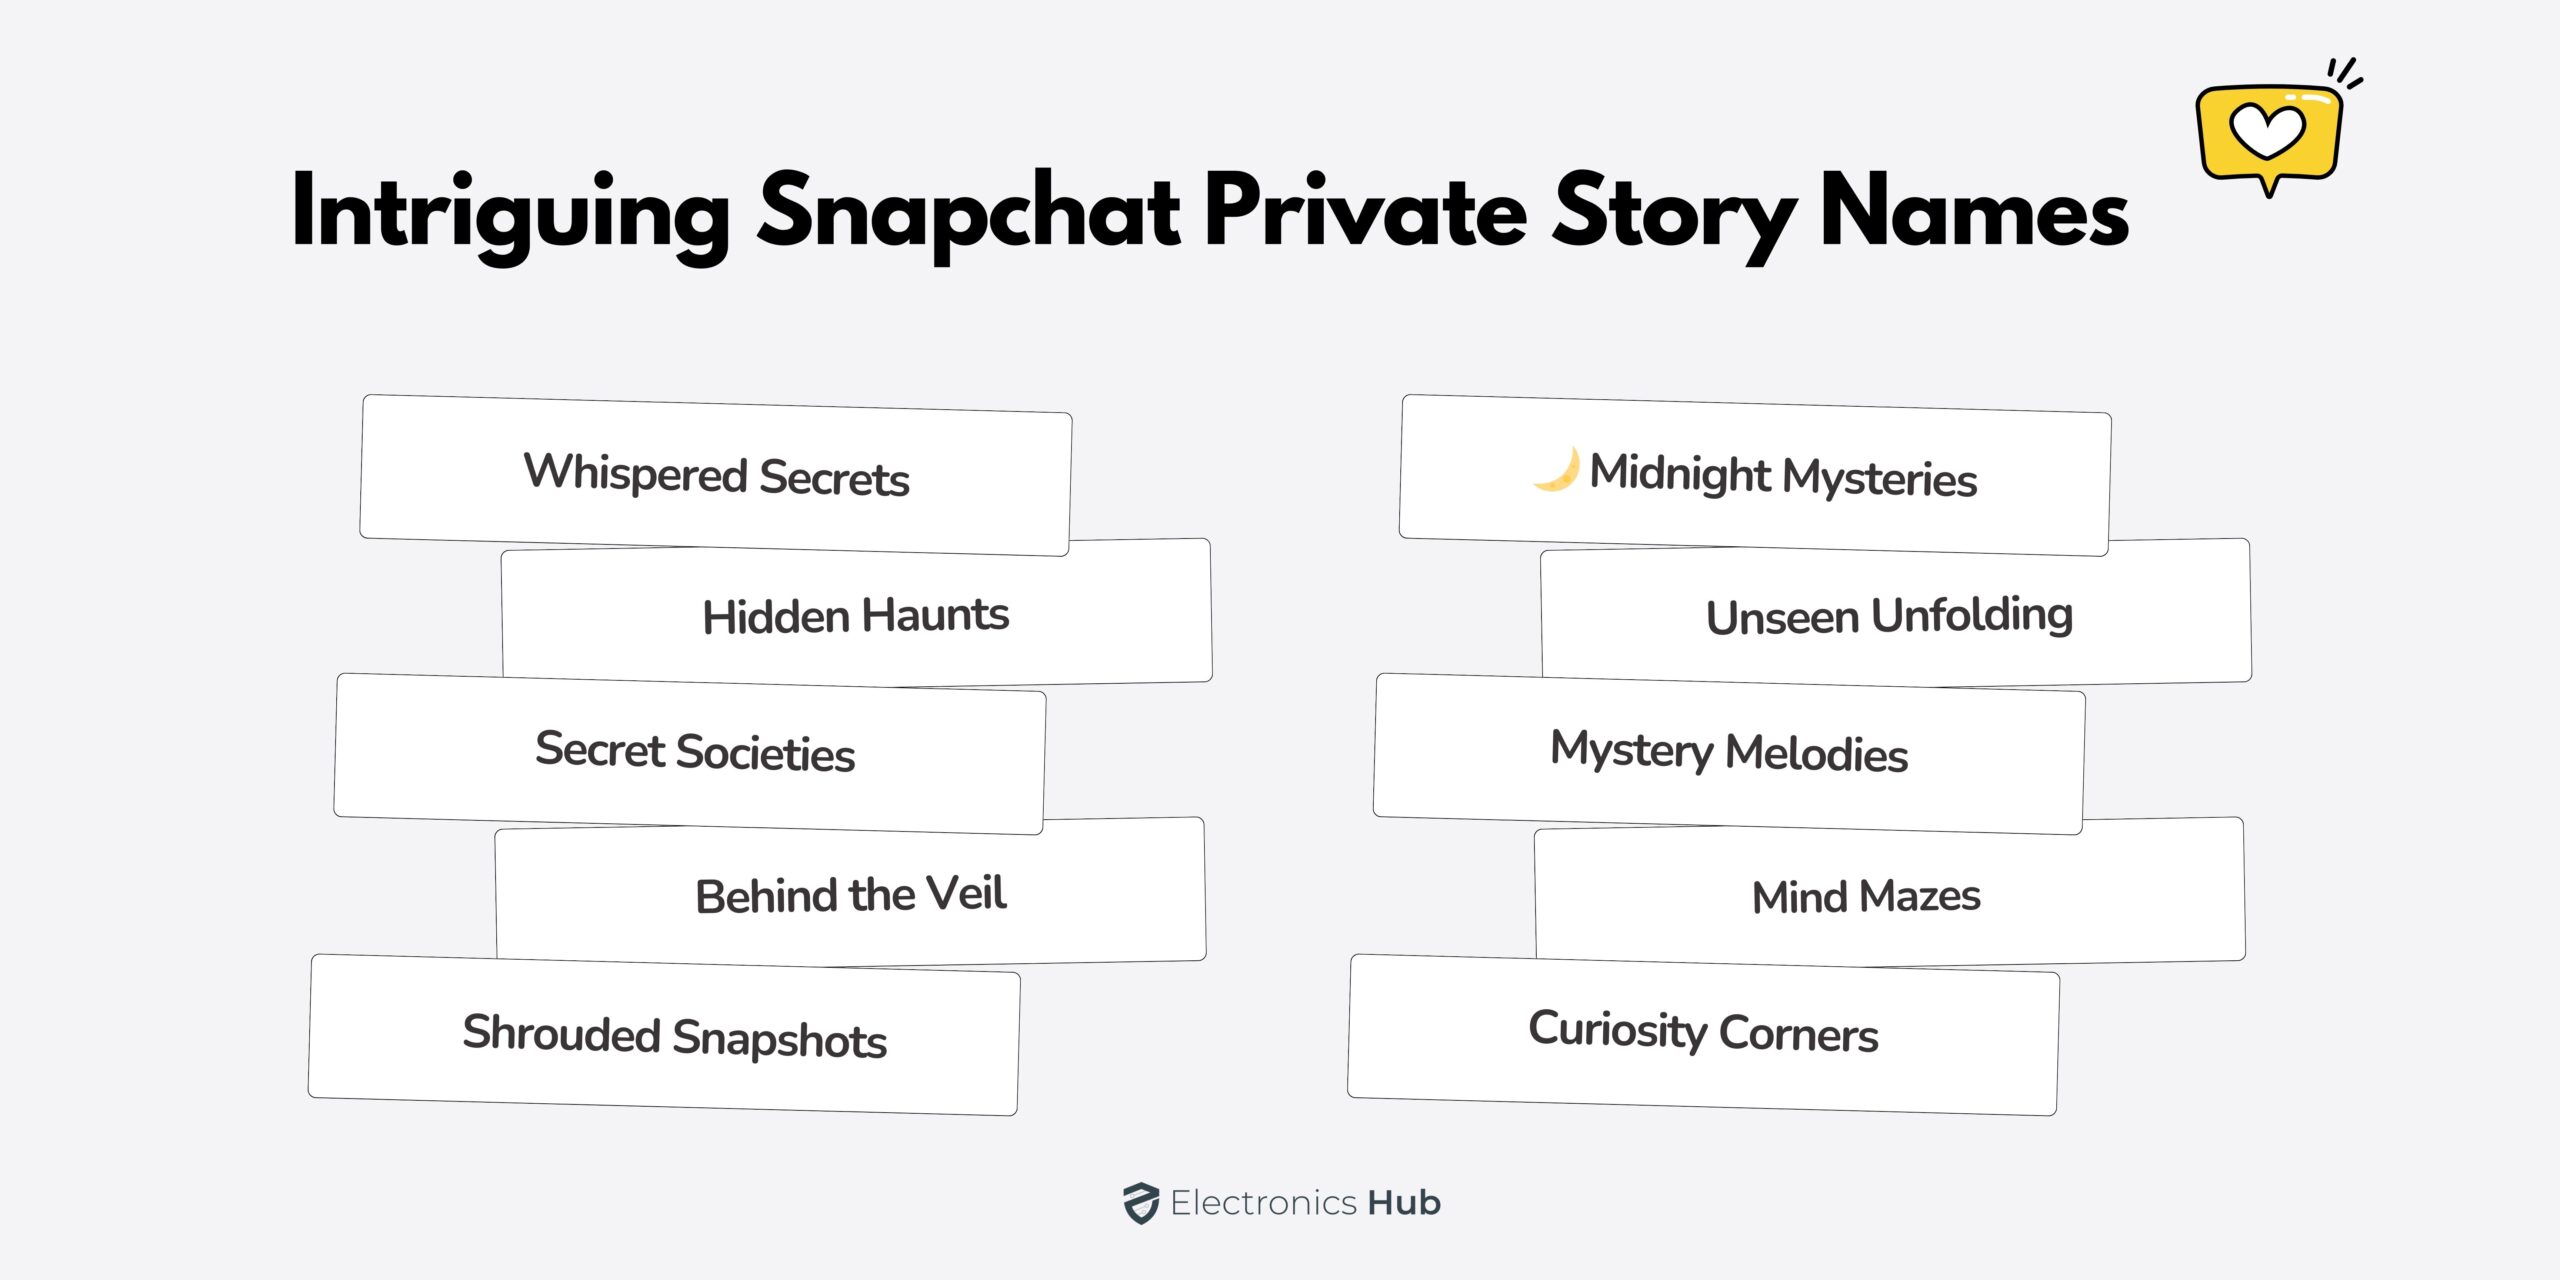 Intriguing Snapchat Private Story Names